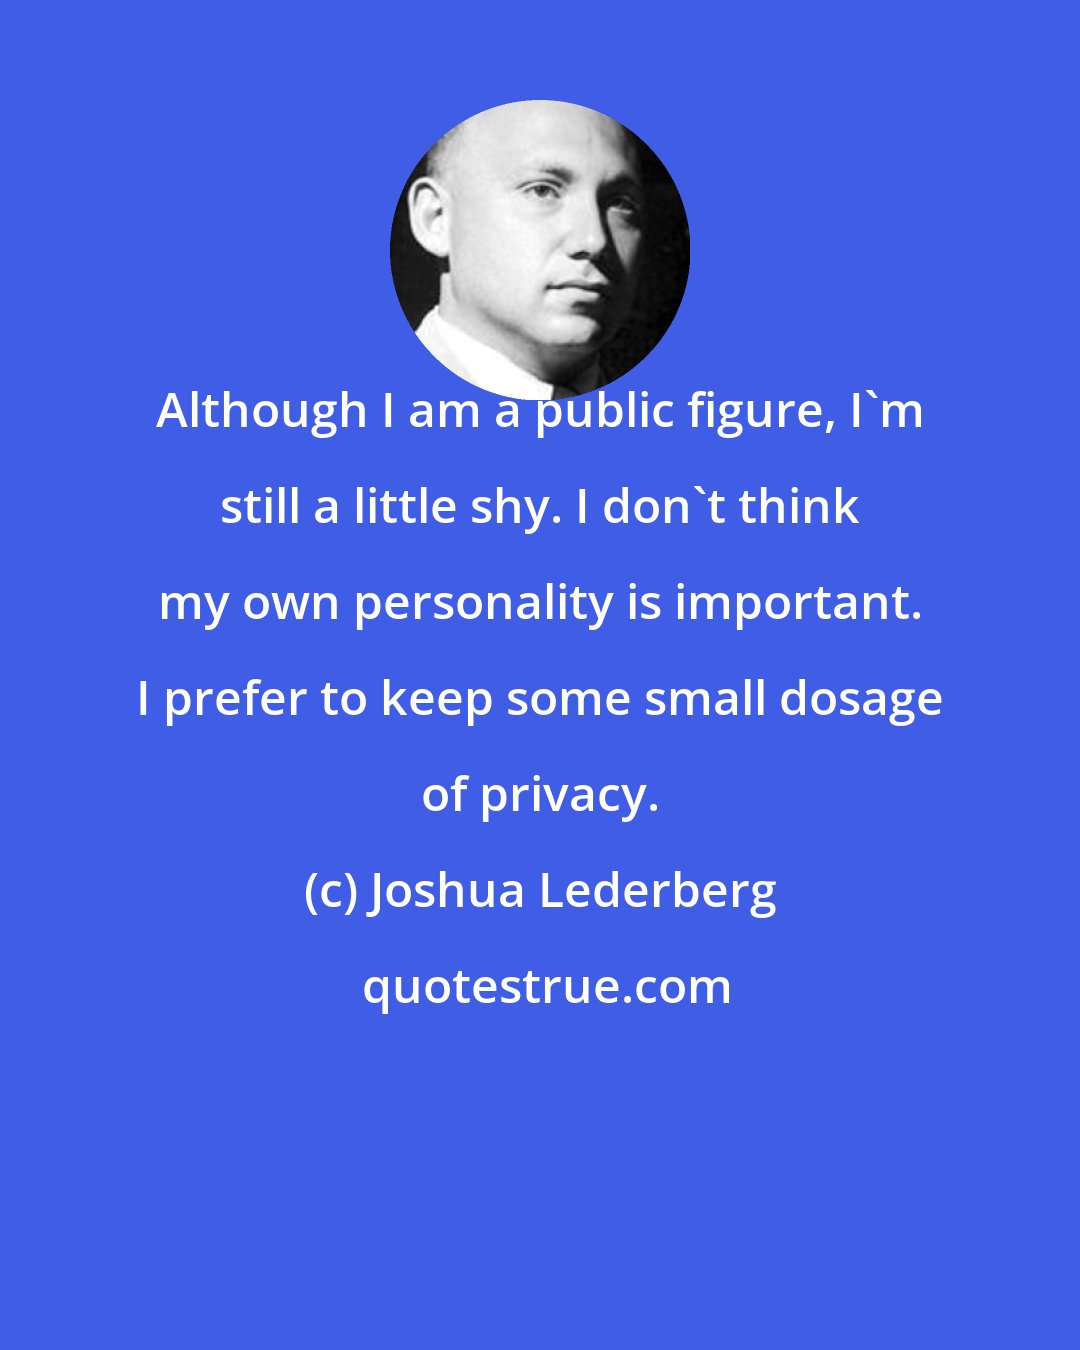 Joshua Lederberg: Although I am a public figure, I'm still a little shy. I don't think my own personality is important. I prefer to keep some small dosage of privacy.